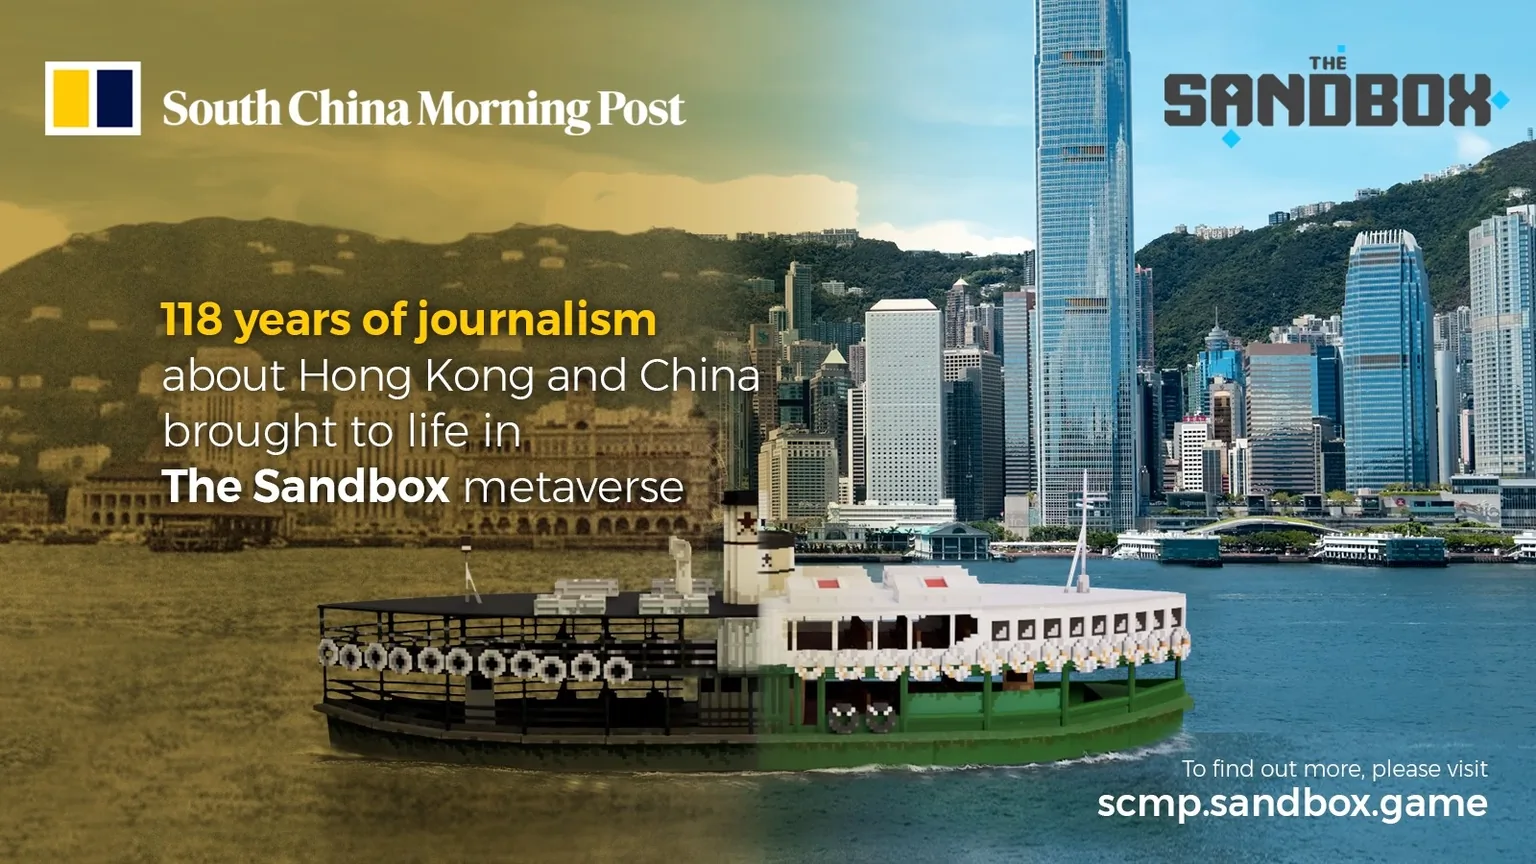 SCMP teams up with The Sandbox